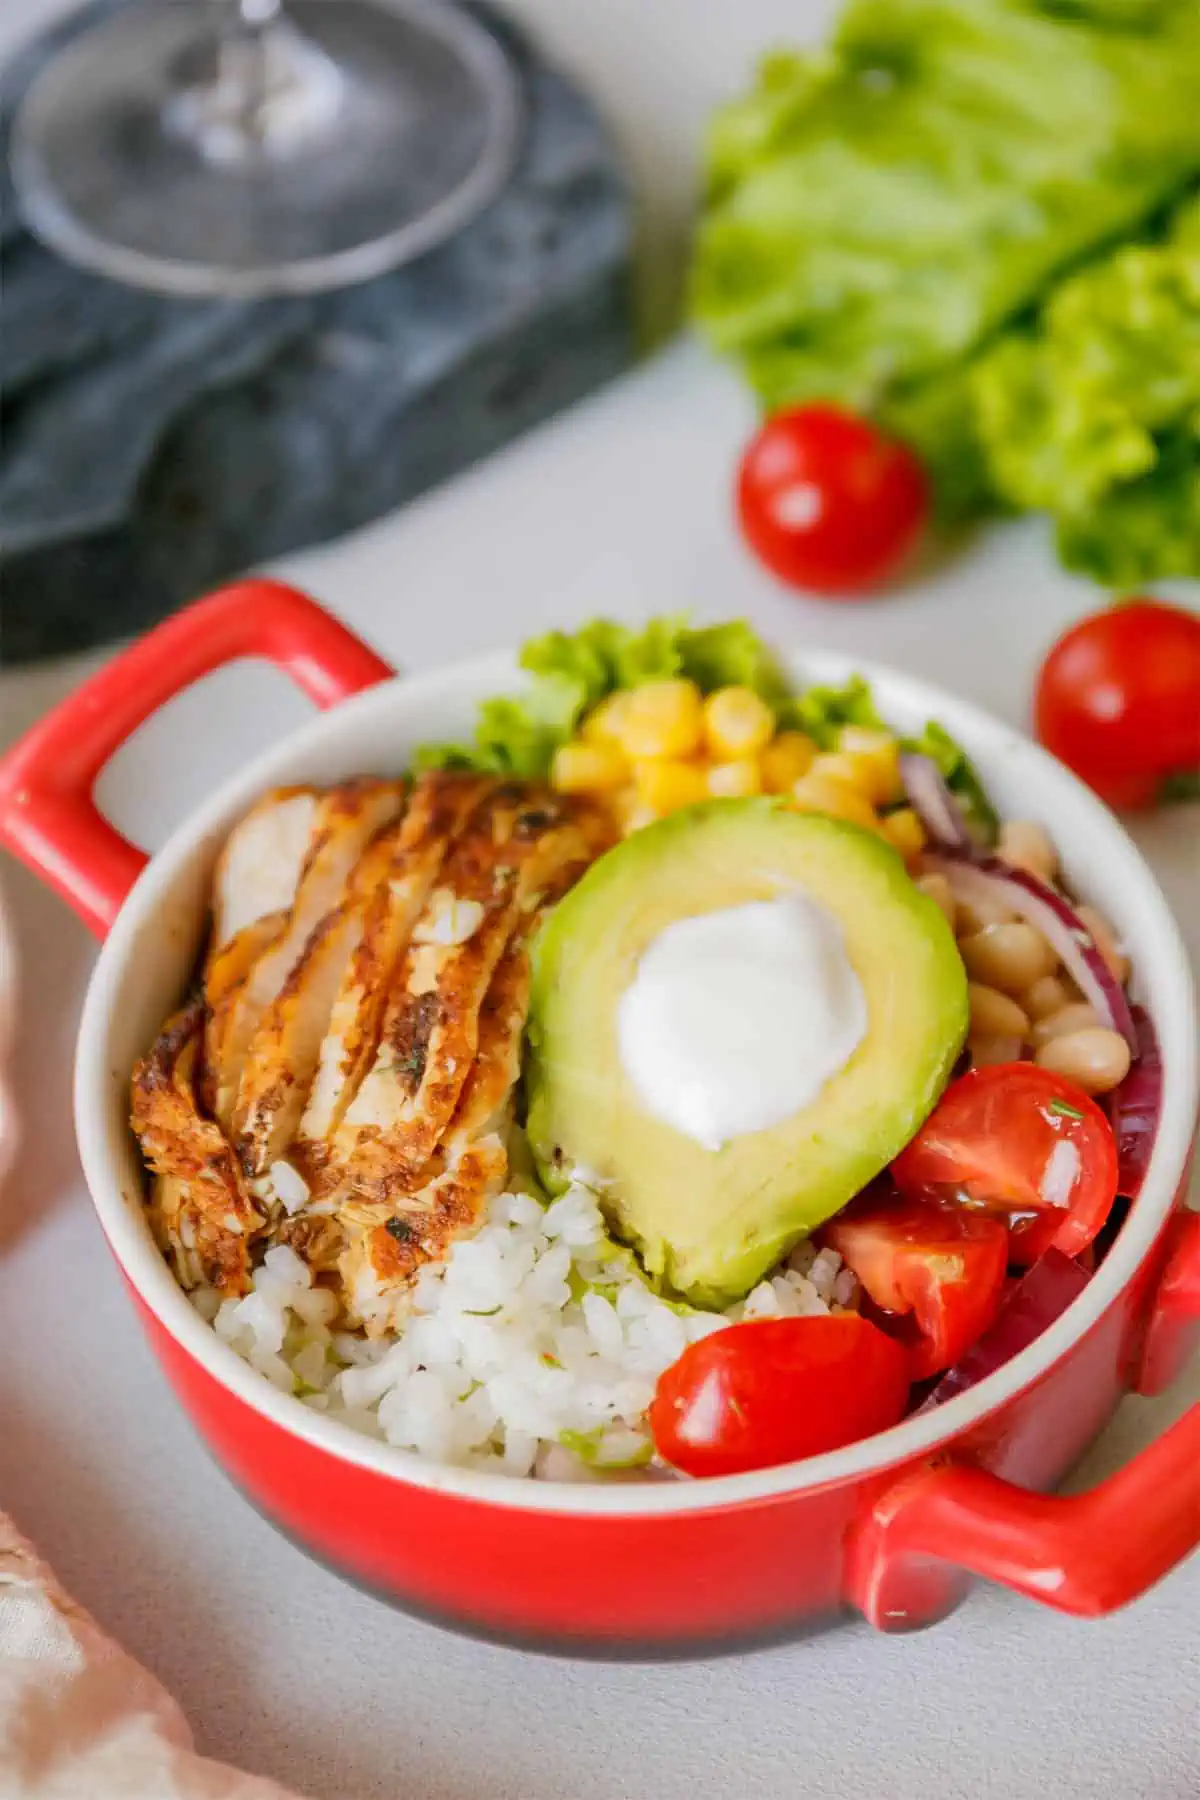 A chicken bowl chipotle on the table ready to eat.